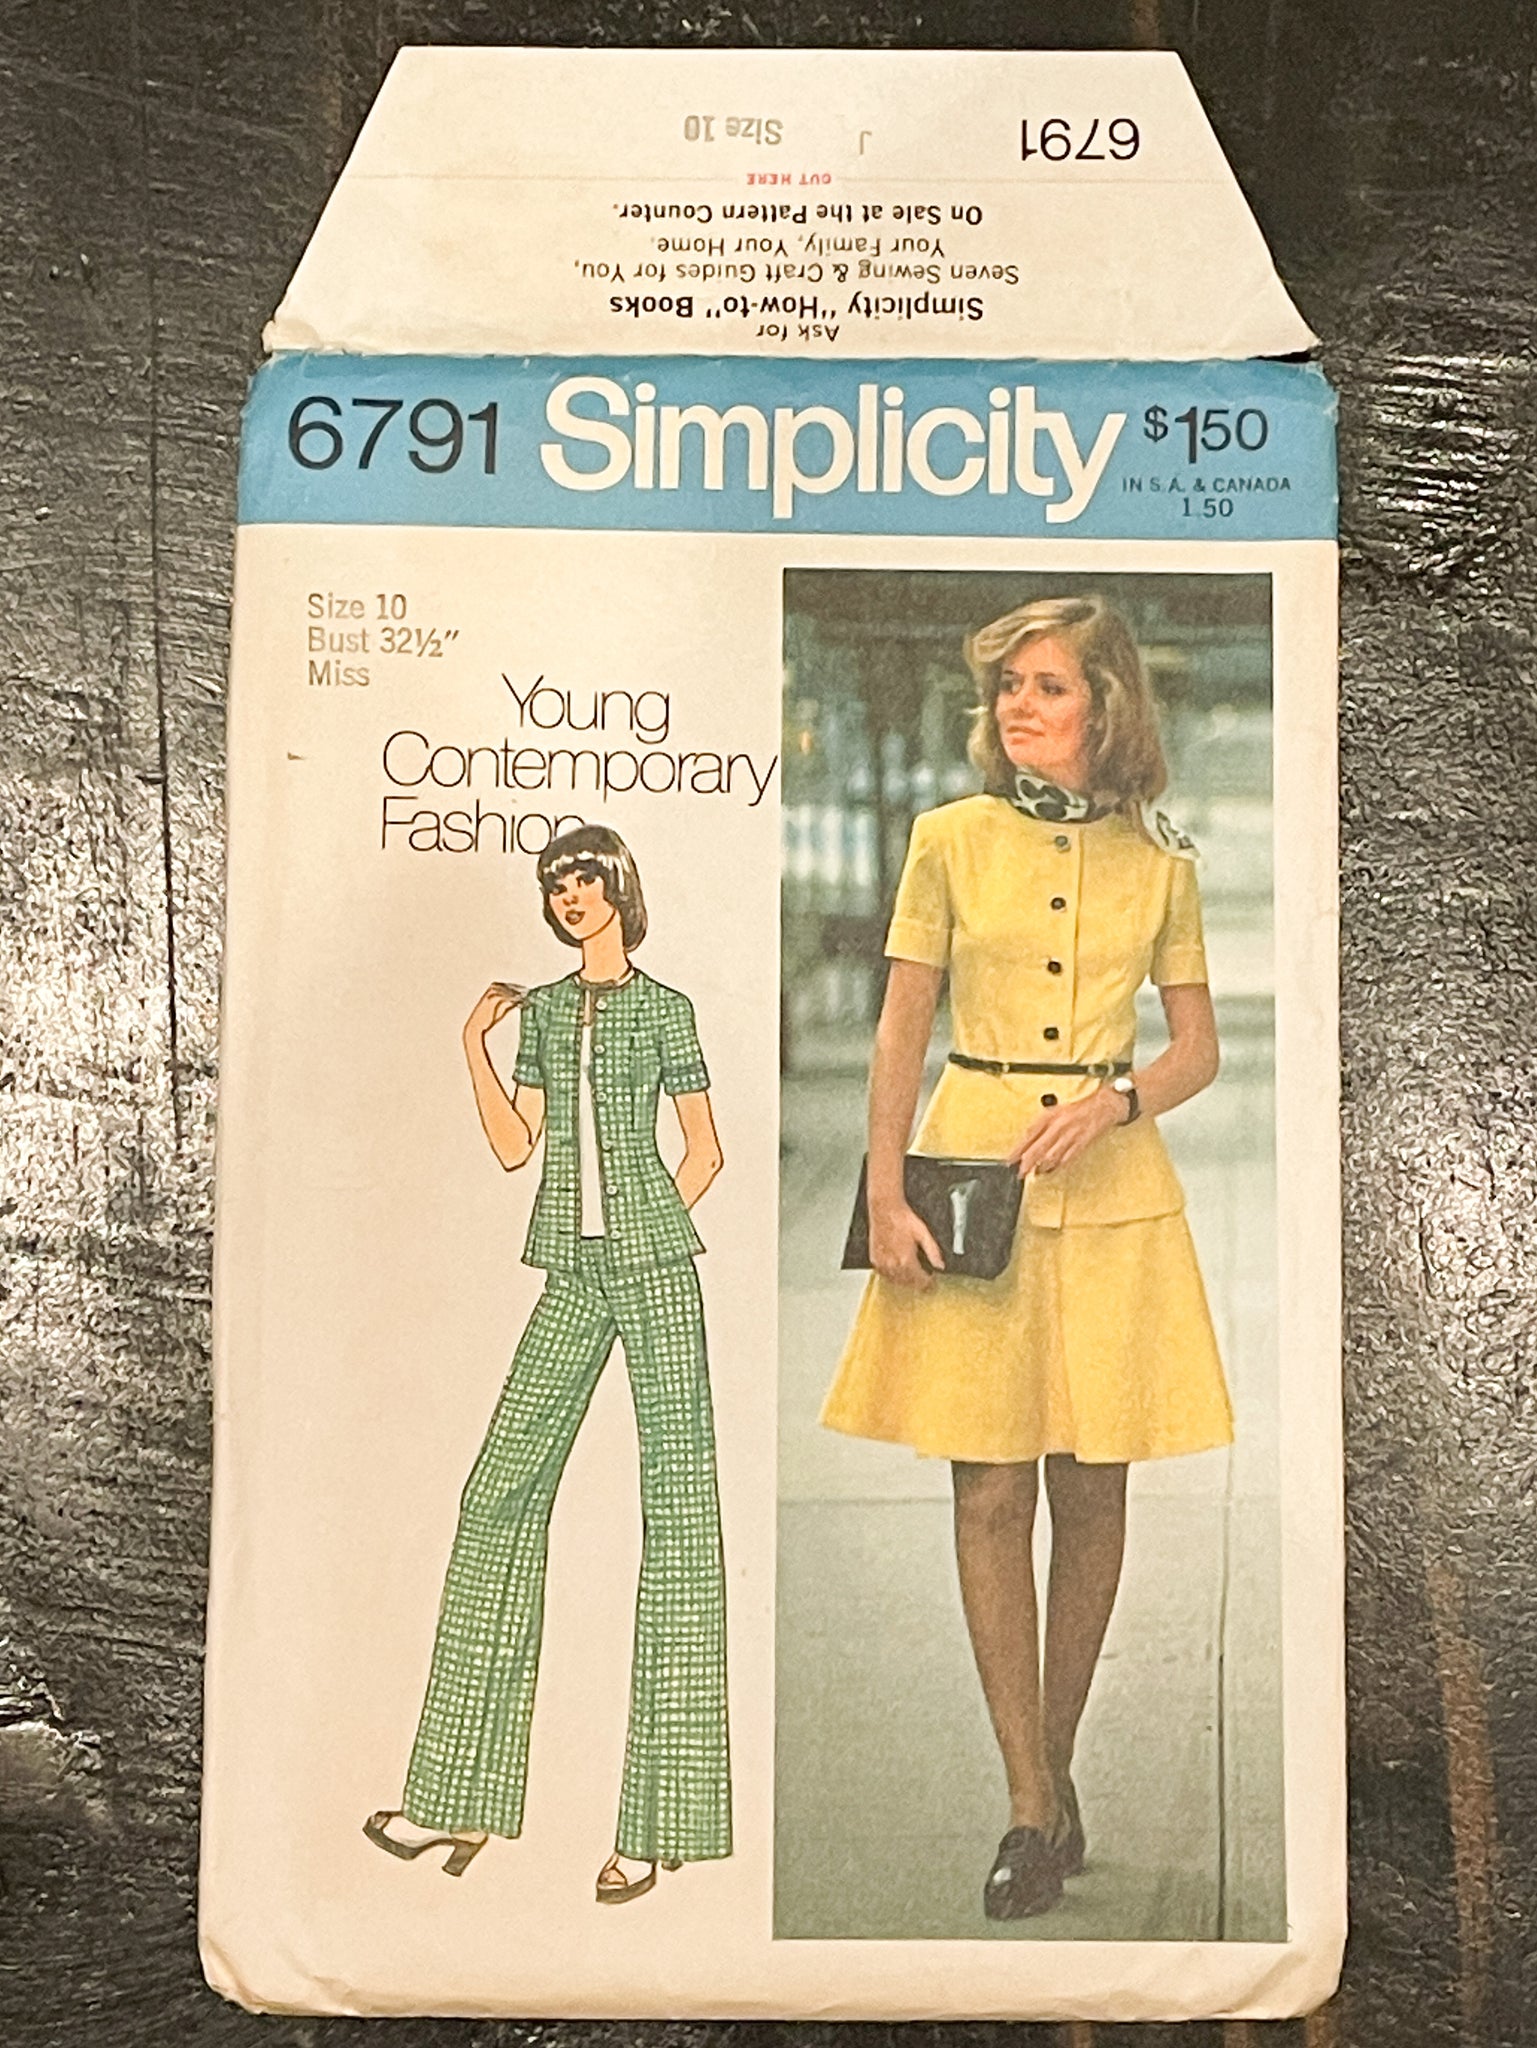 1974 Simplicity 6791 Pattern - Women's Top, Skirt and Pants